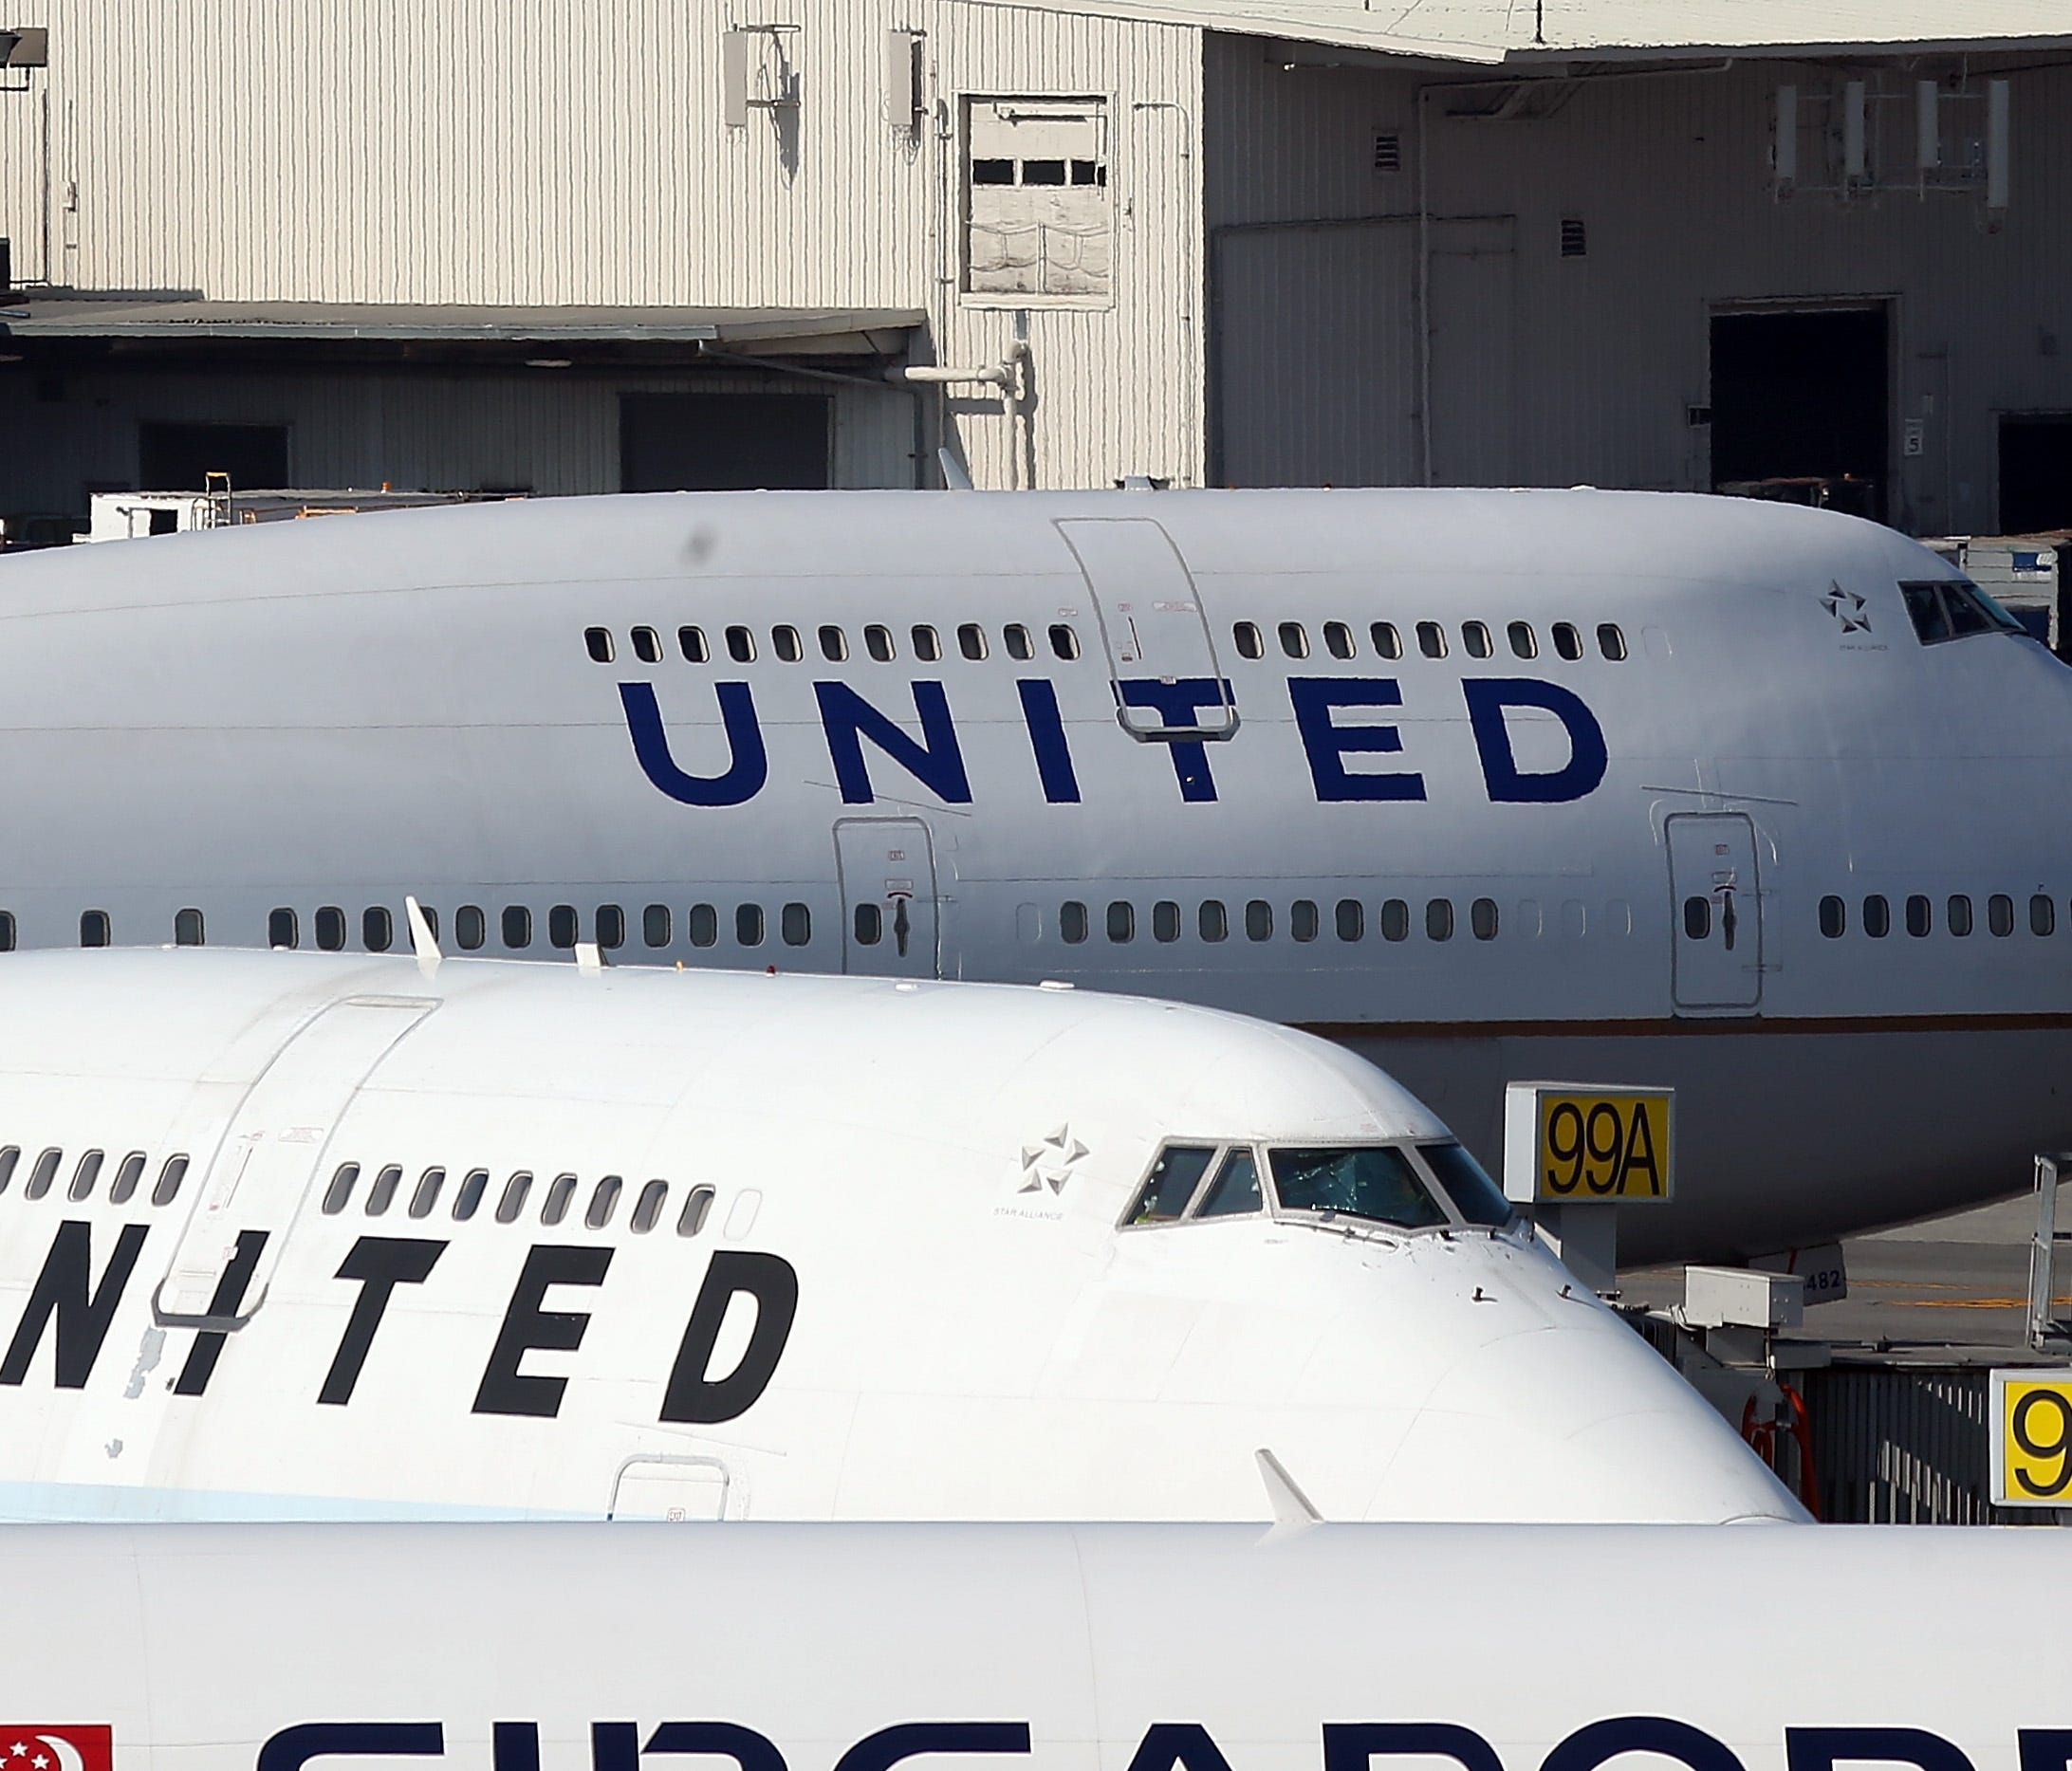 Sunday night's confrontation stemmed from a common air travel issue — a full flight. United was trying to make room for four employees of a partner airline, meaning four people had to get off.